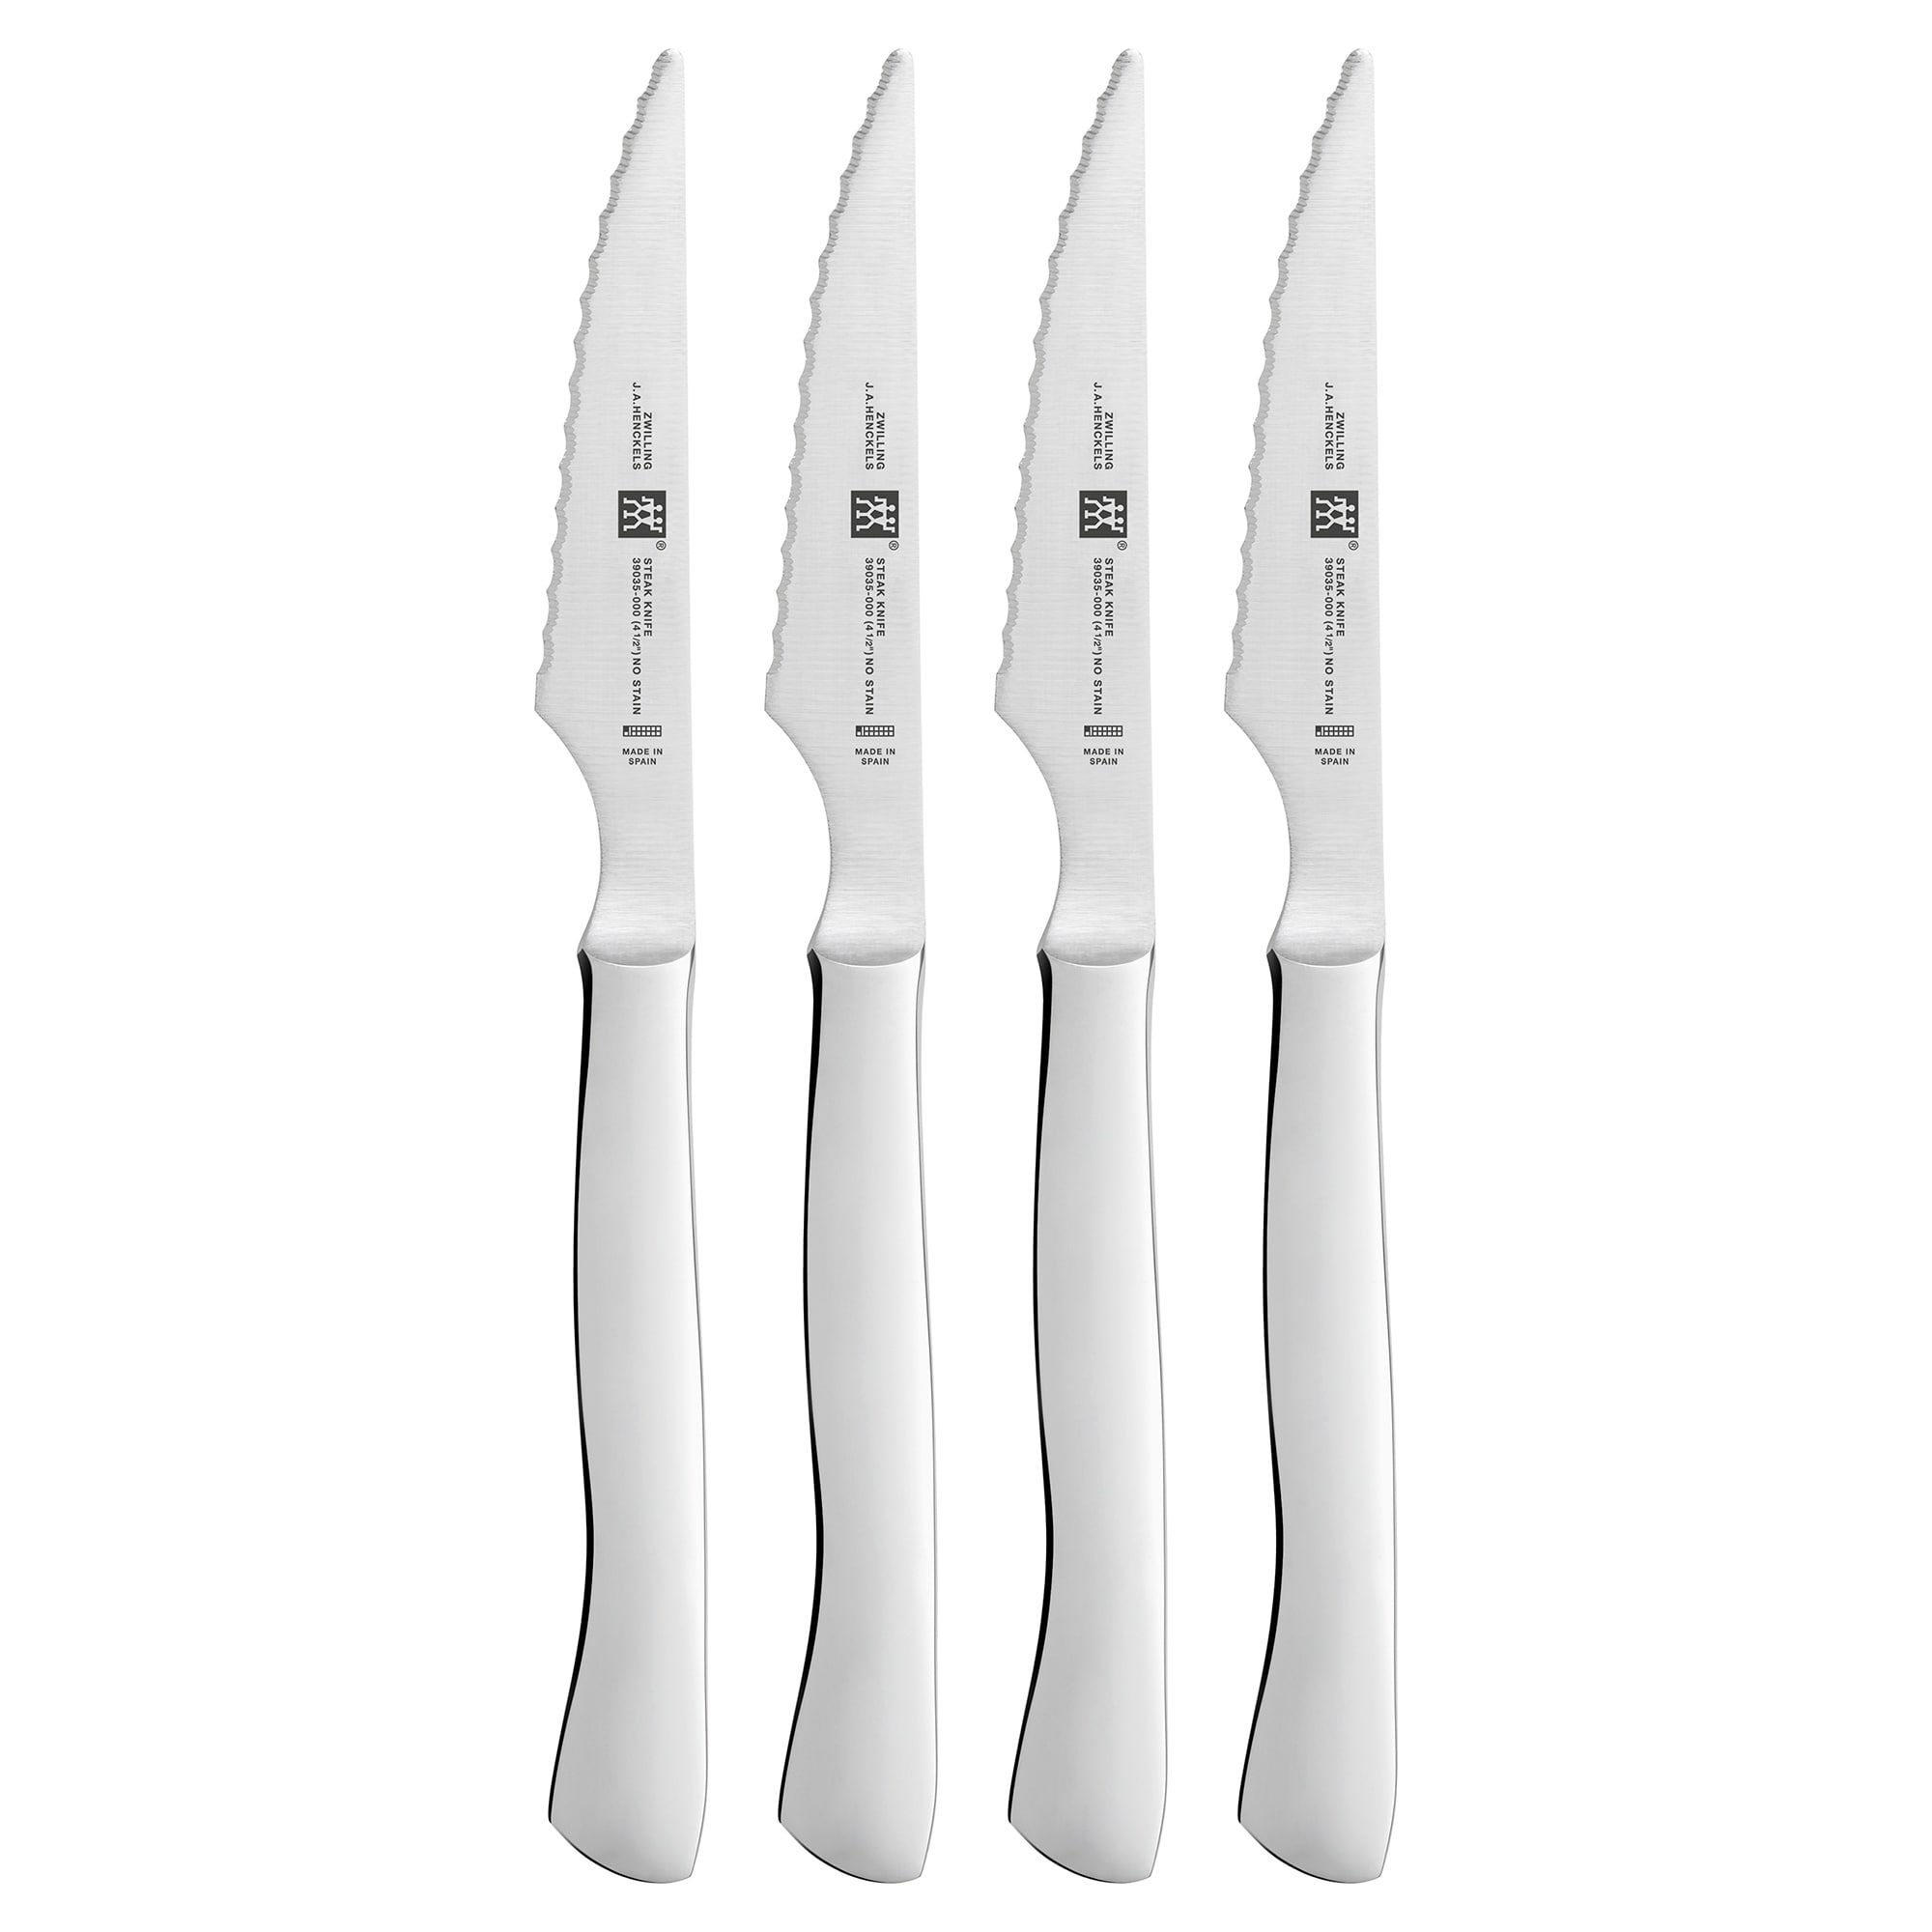 https://ak1.ostkcdn.com/images/products/is/images/direct/8366bc5d2b40d74ac4bcd3e18a5082c0f0ade99c/ZWILLING-J.A.-Henckels-4-pc-Stainless-Steel-Serrated-Steak-Knife-Set.jpg